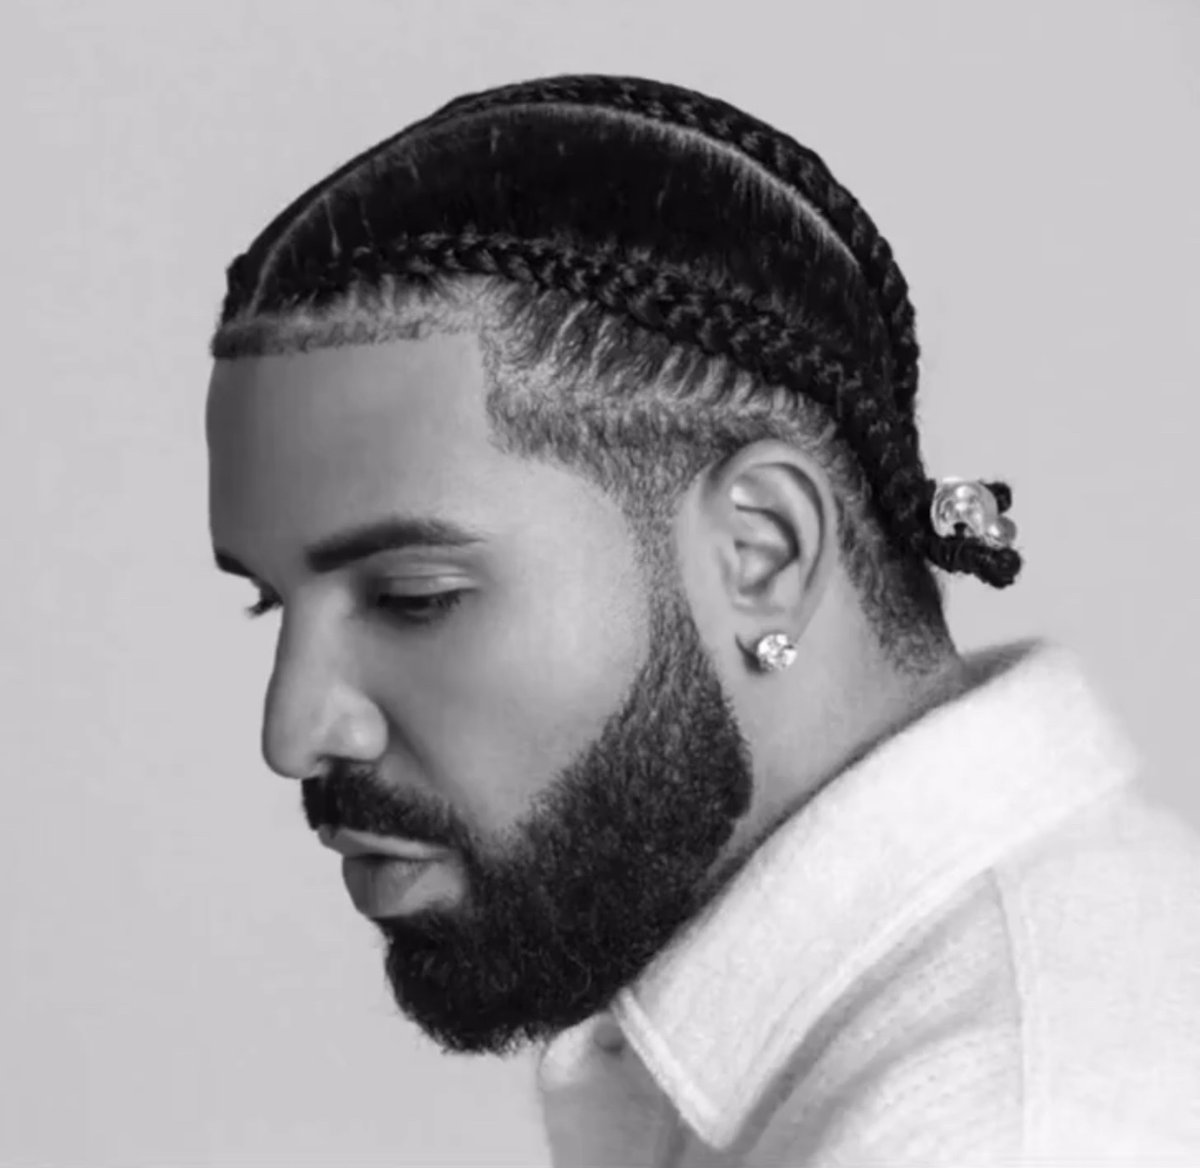 “Drake is better than every other rapper combined; he's the greatest to ever pick up a mic... there are levels to this sh*t” 😳 Adin Ross shares his take on the new diss track by Drake.